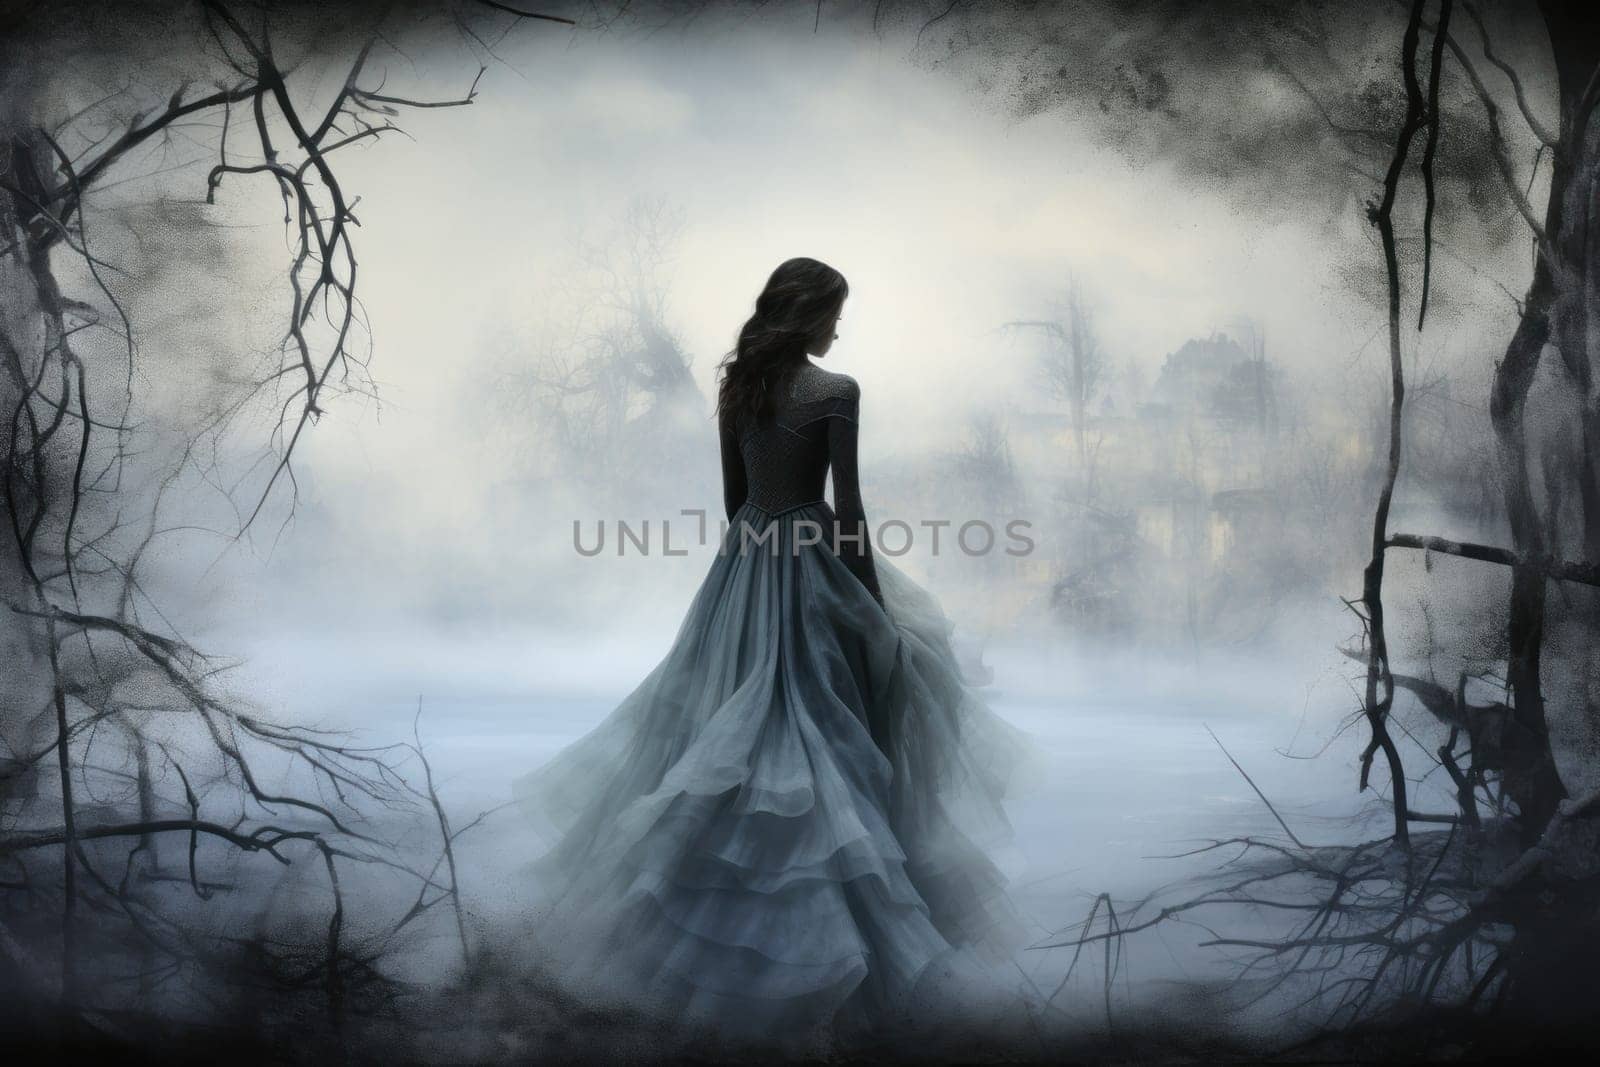 A captivating visual representation of the winter ambiance, focusing on the enigmatic allure of fog and mist enveloping the landscape, especially near bodies of water.